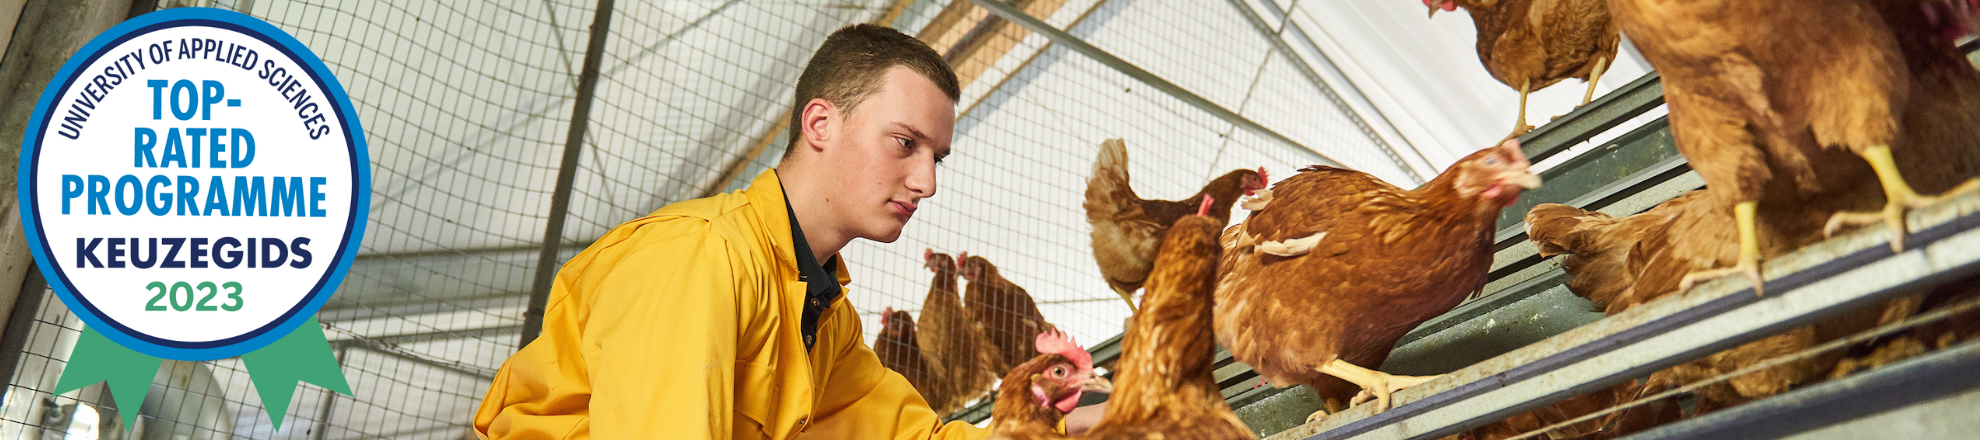 Bachelor International poultry management Aeres university of applied sciences